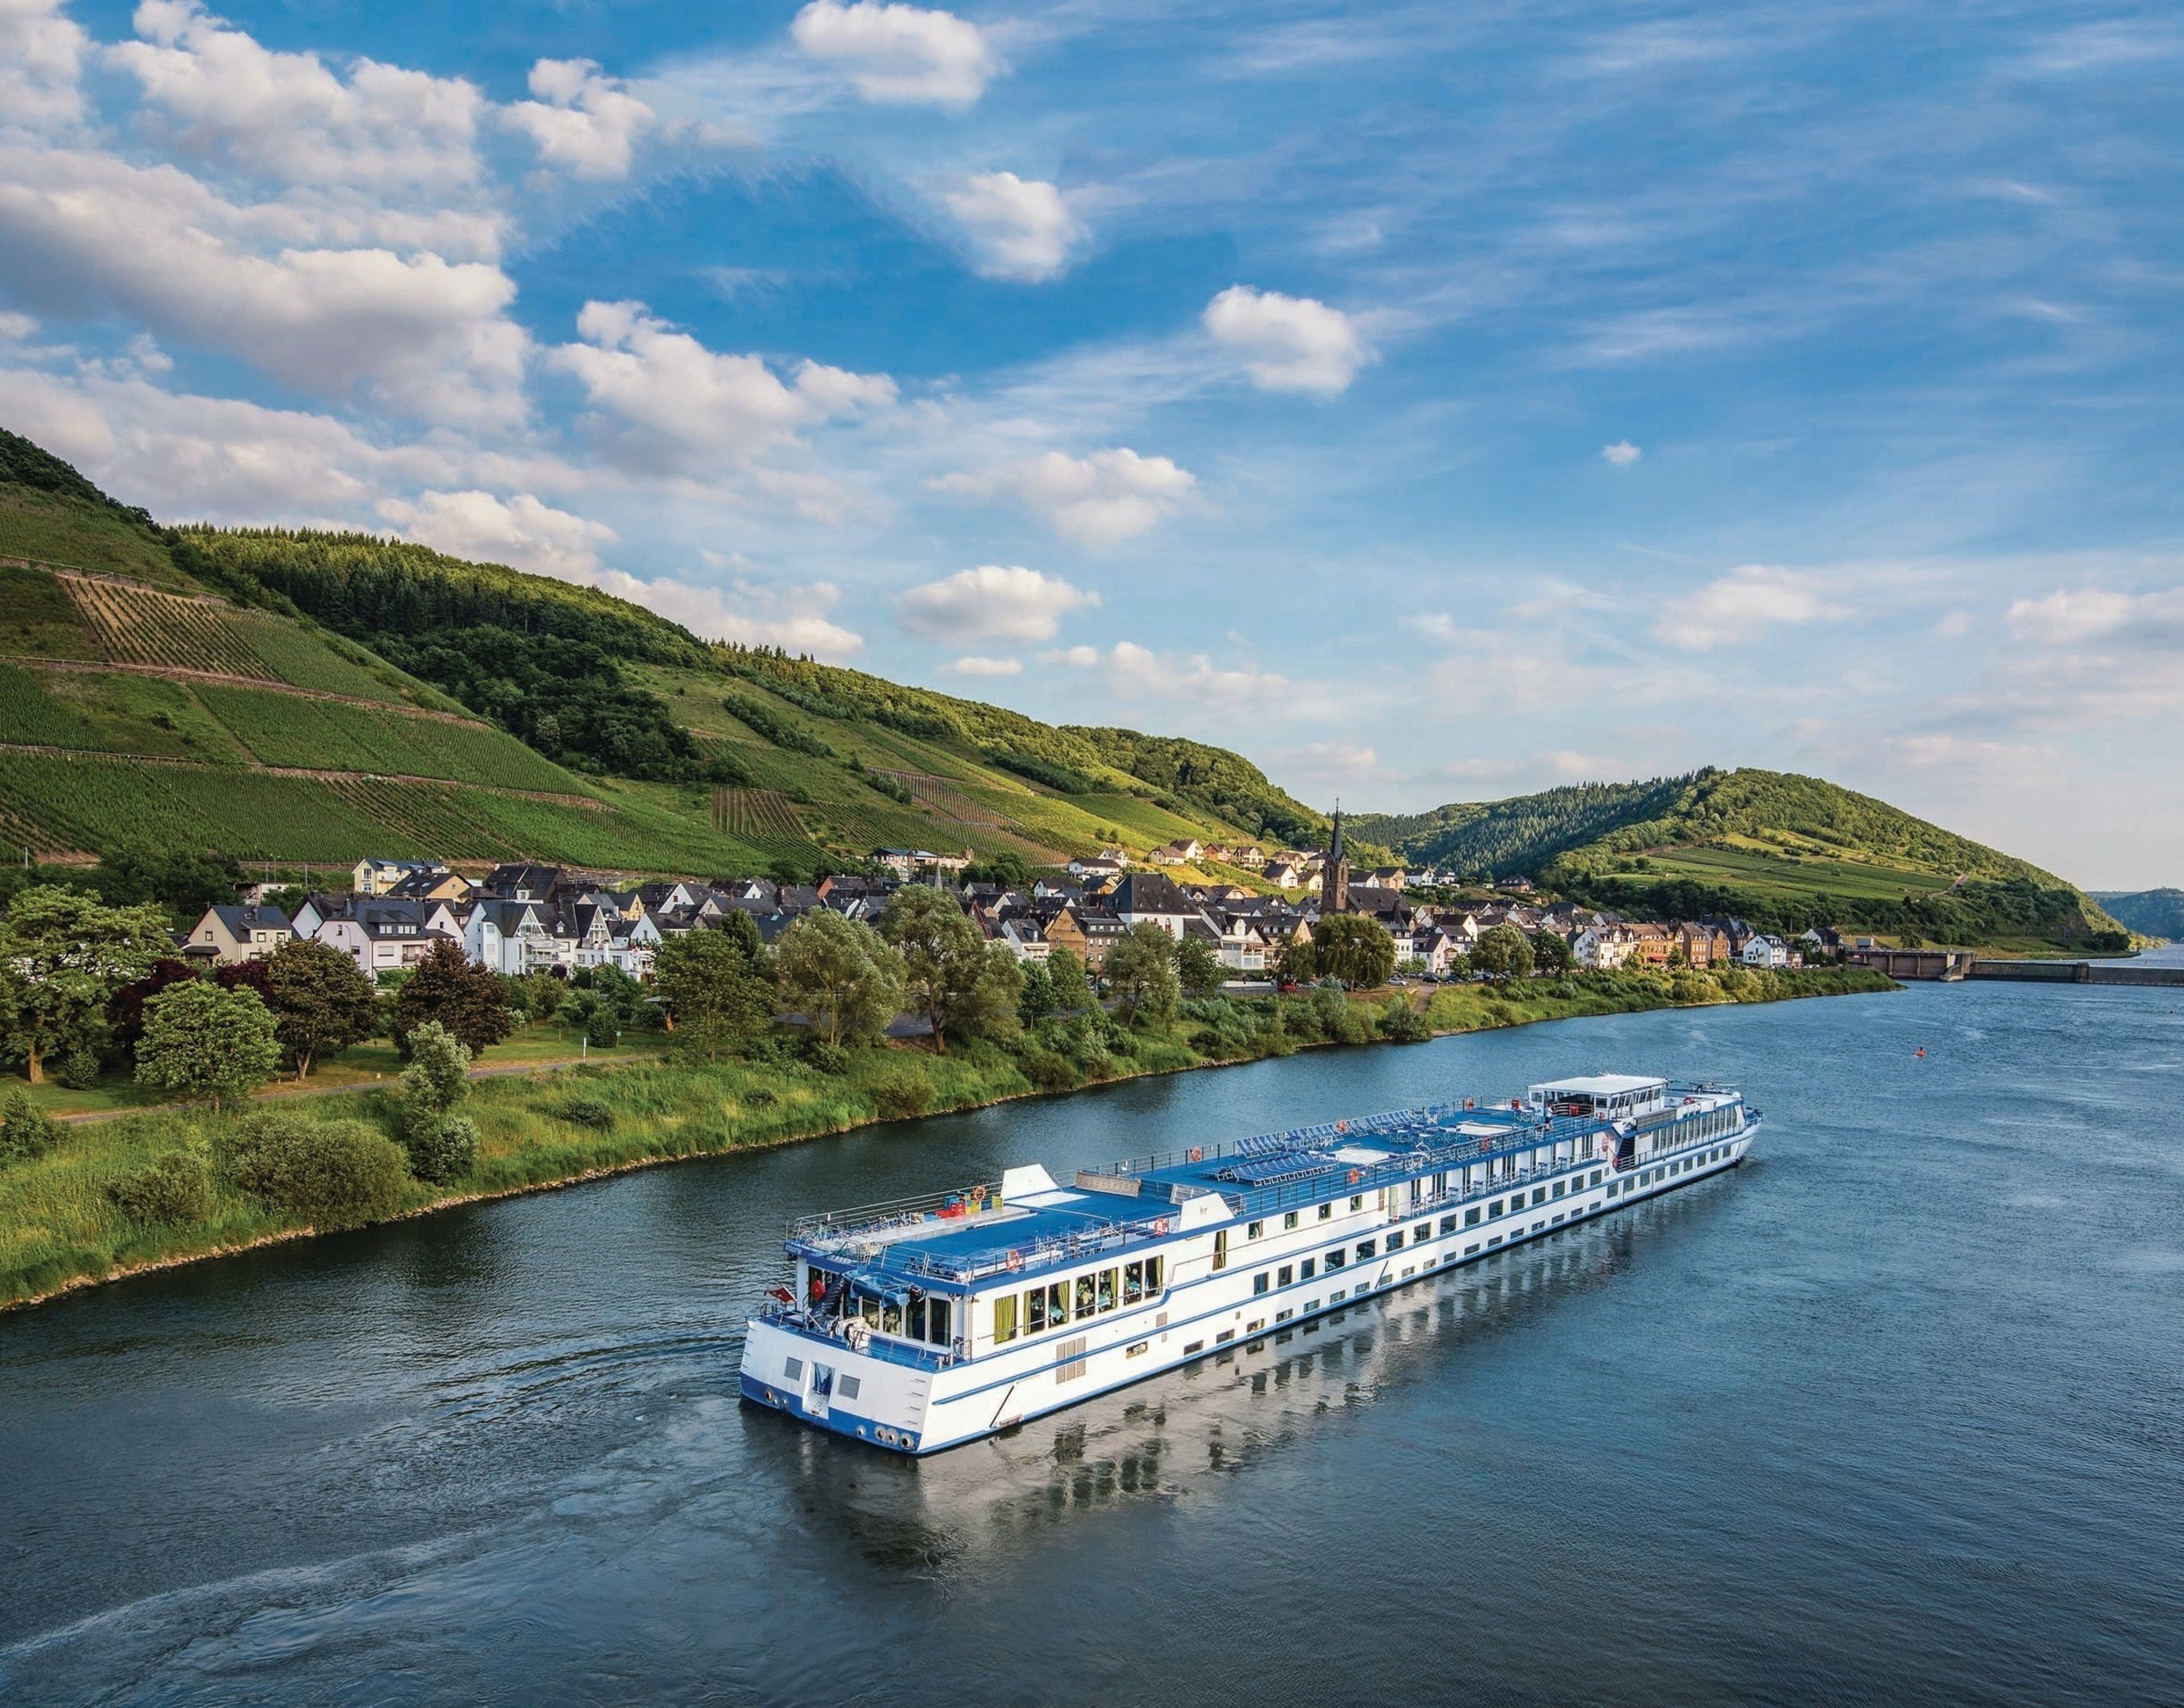 Grand Circle Cruise Line's River Melody sails along the Moselle Valley, passing picturesque villages and towns along the way.